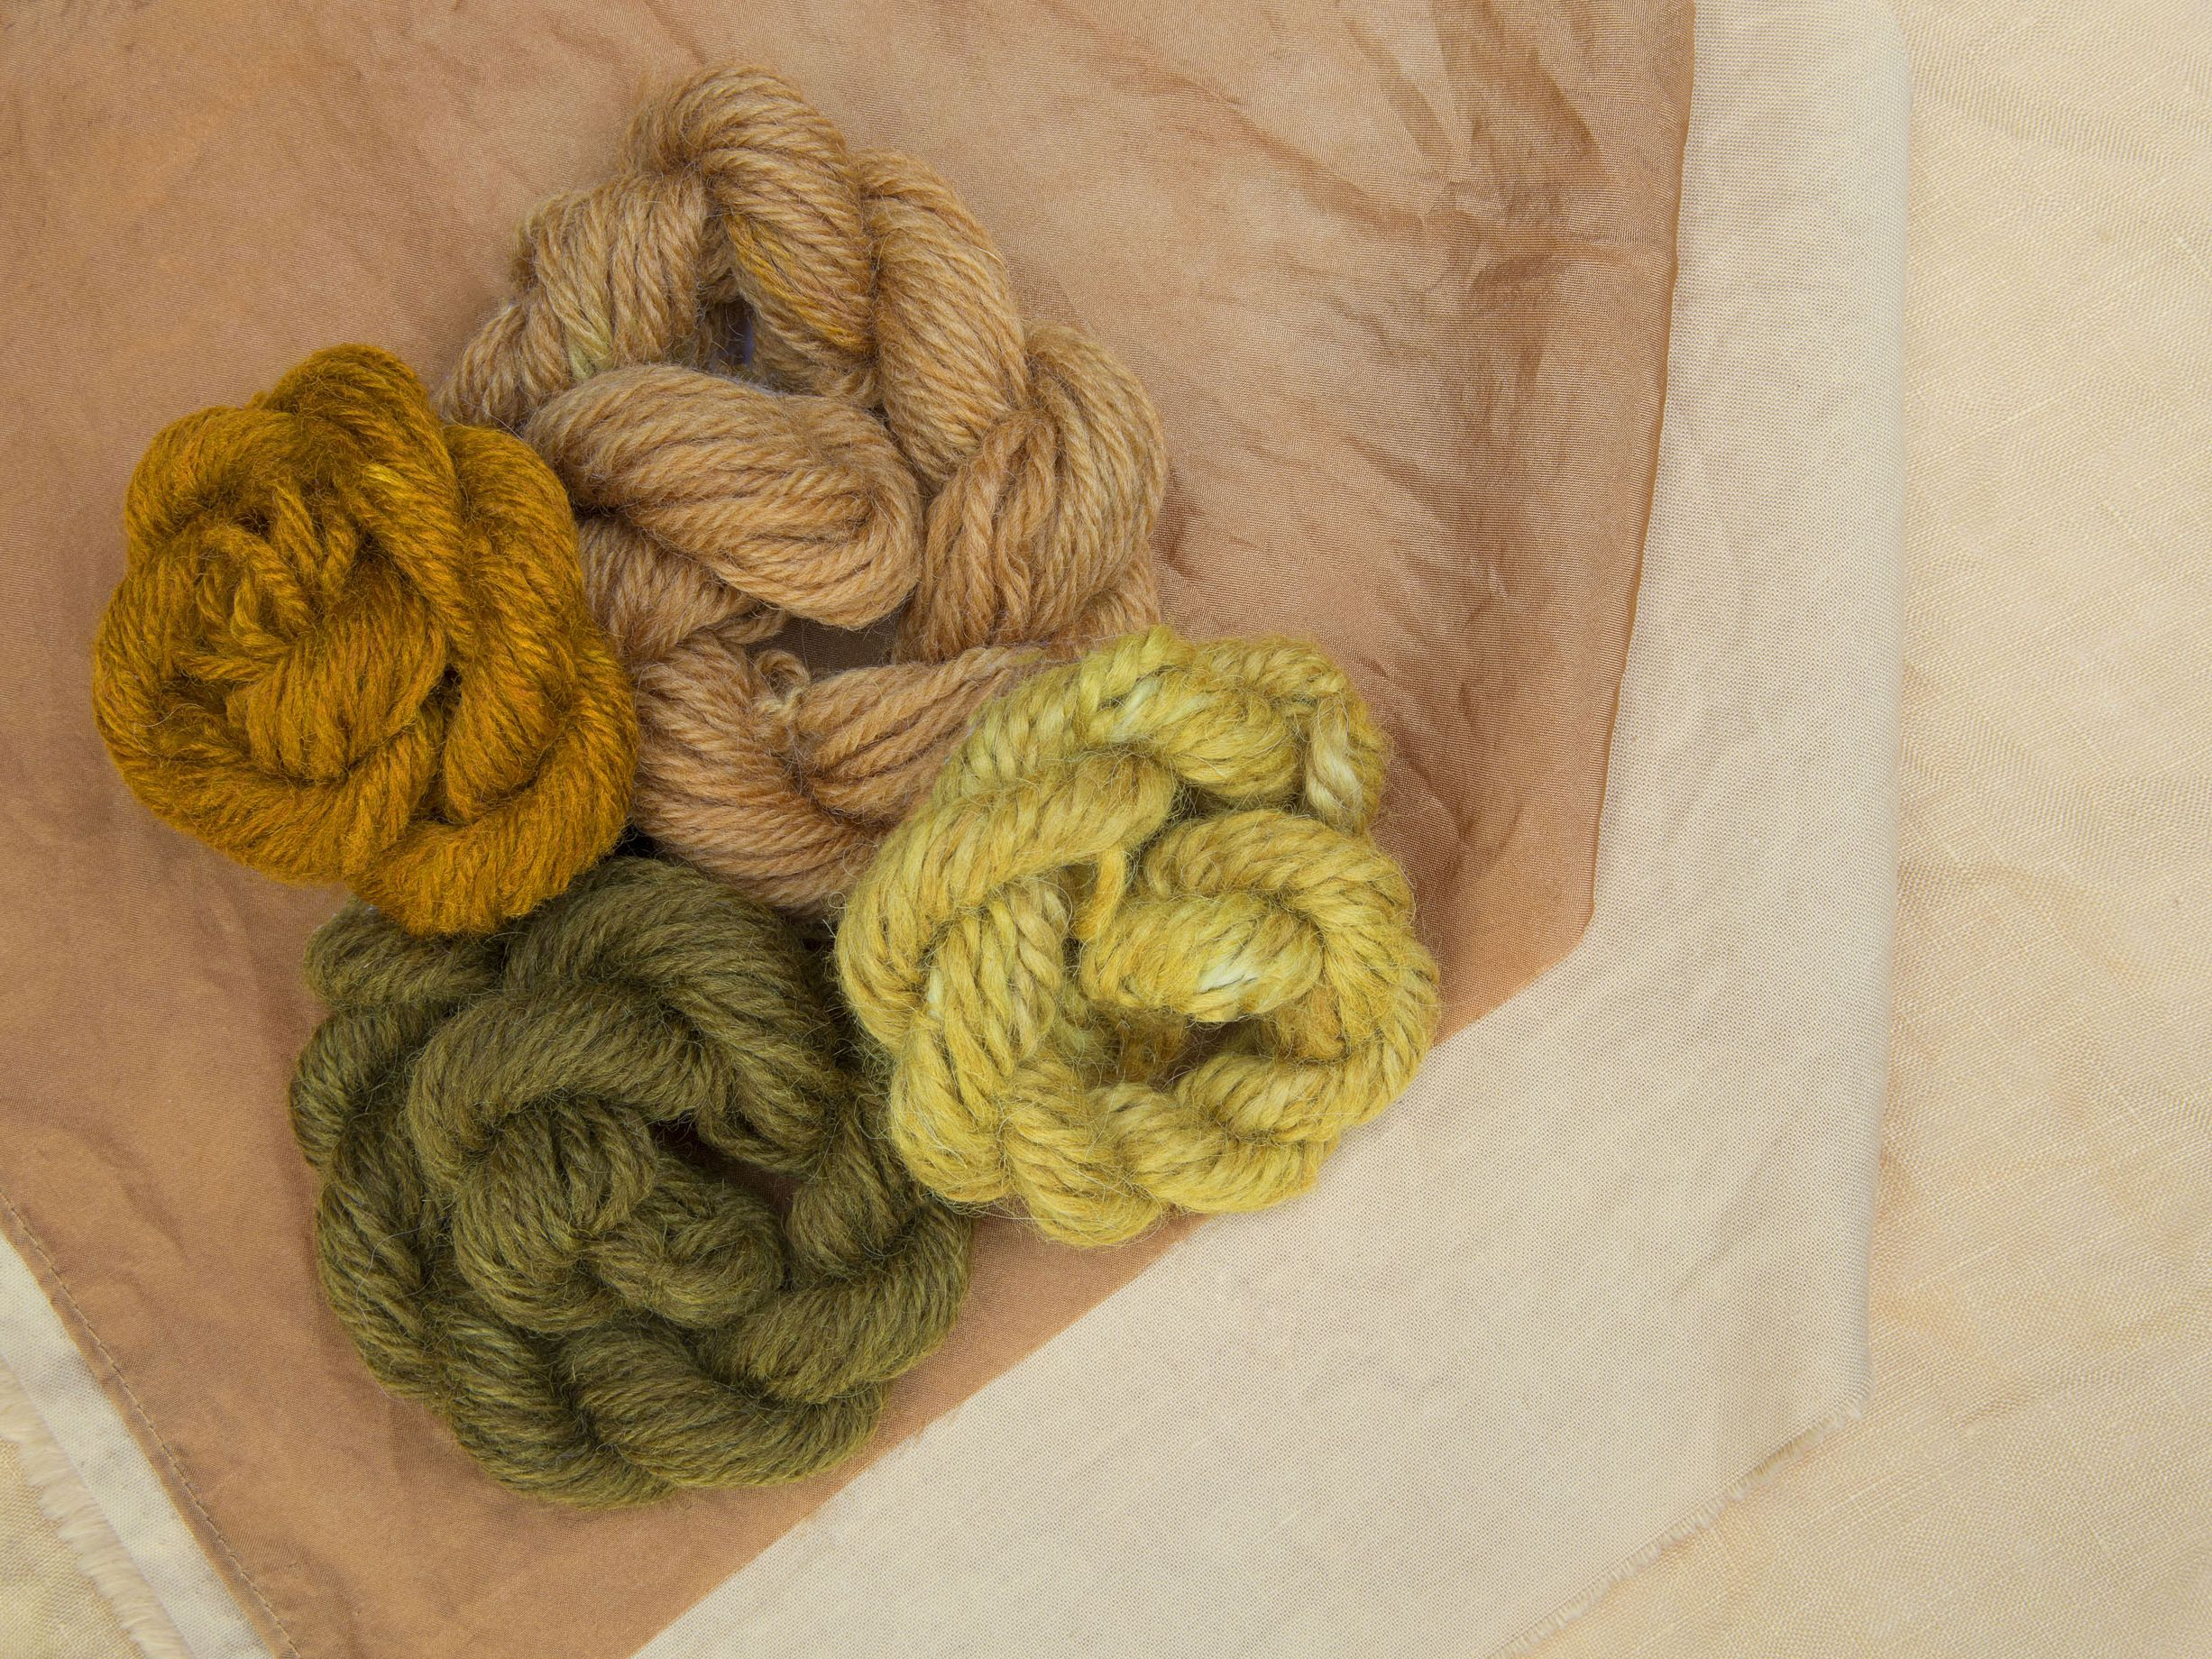 Four naturally dyed yarns in earth shades of orange, green, brown, and yellow